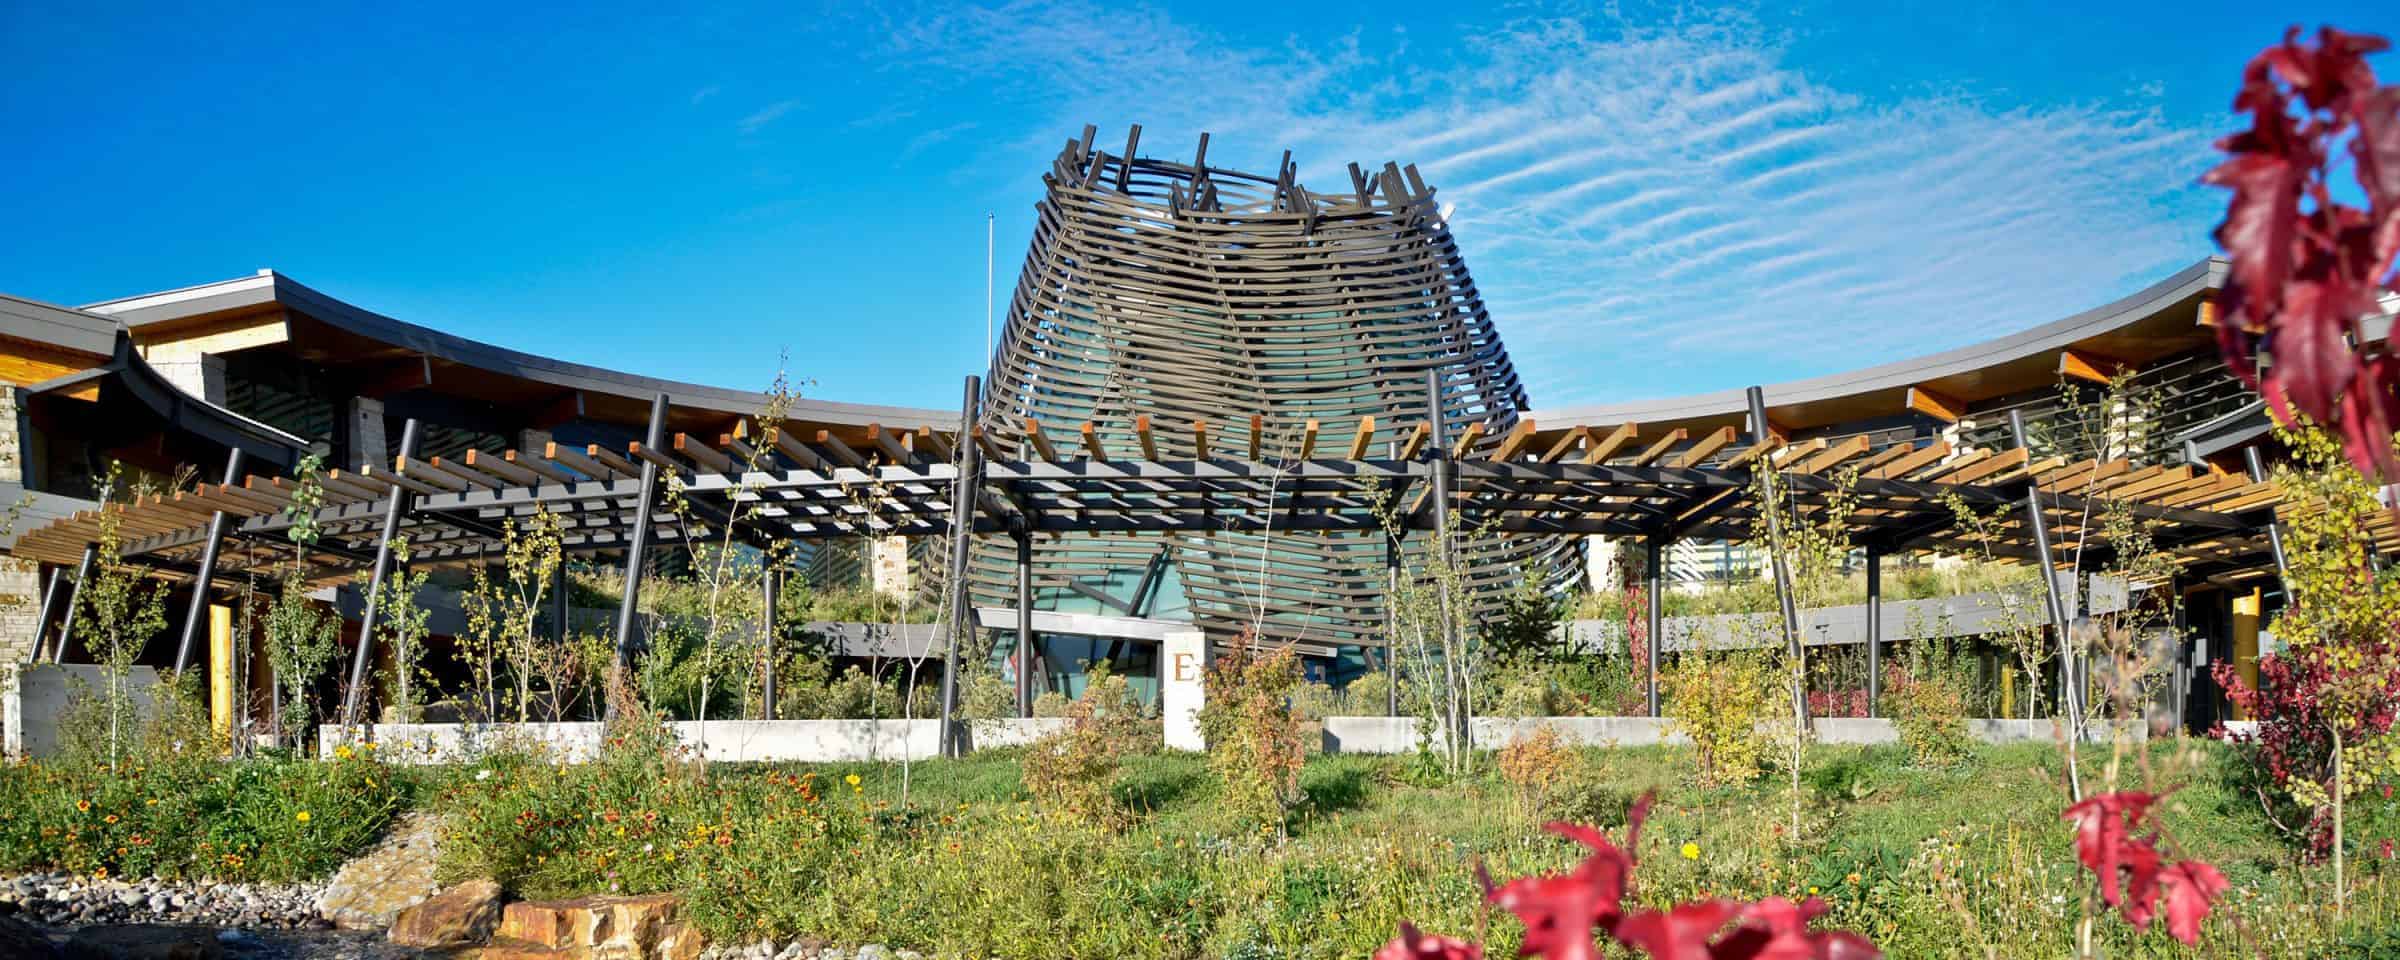 Southern Ute Museum and Cultural Center - Durango Magazine